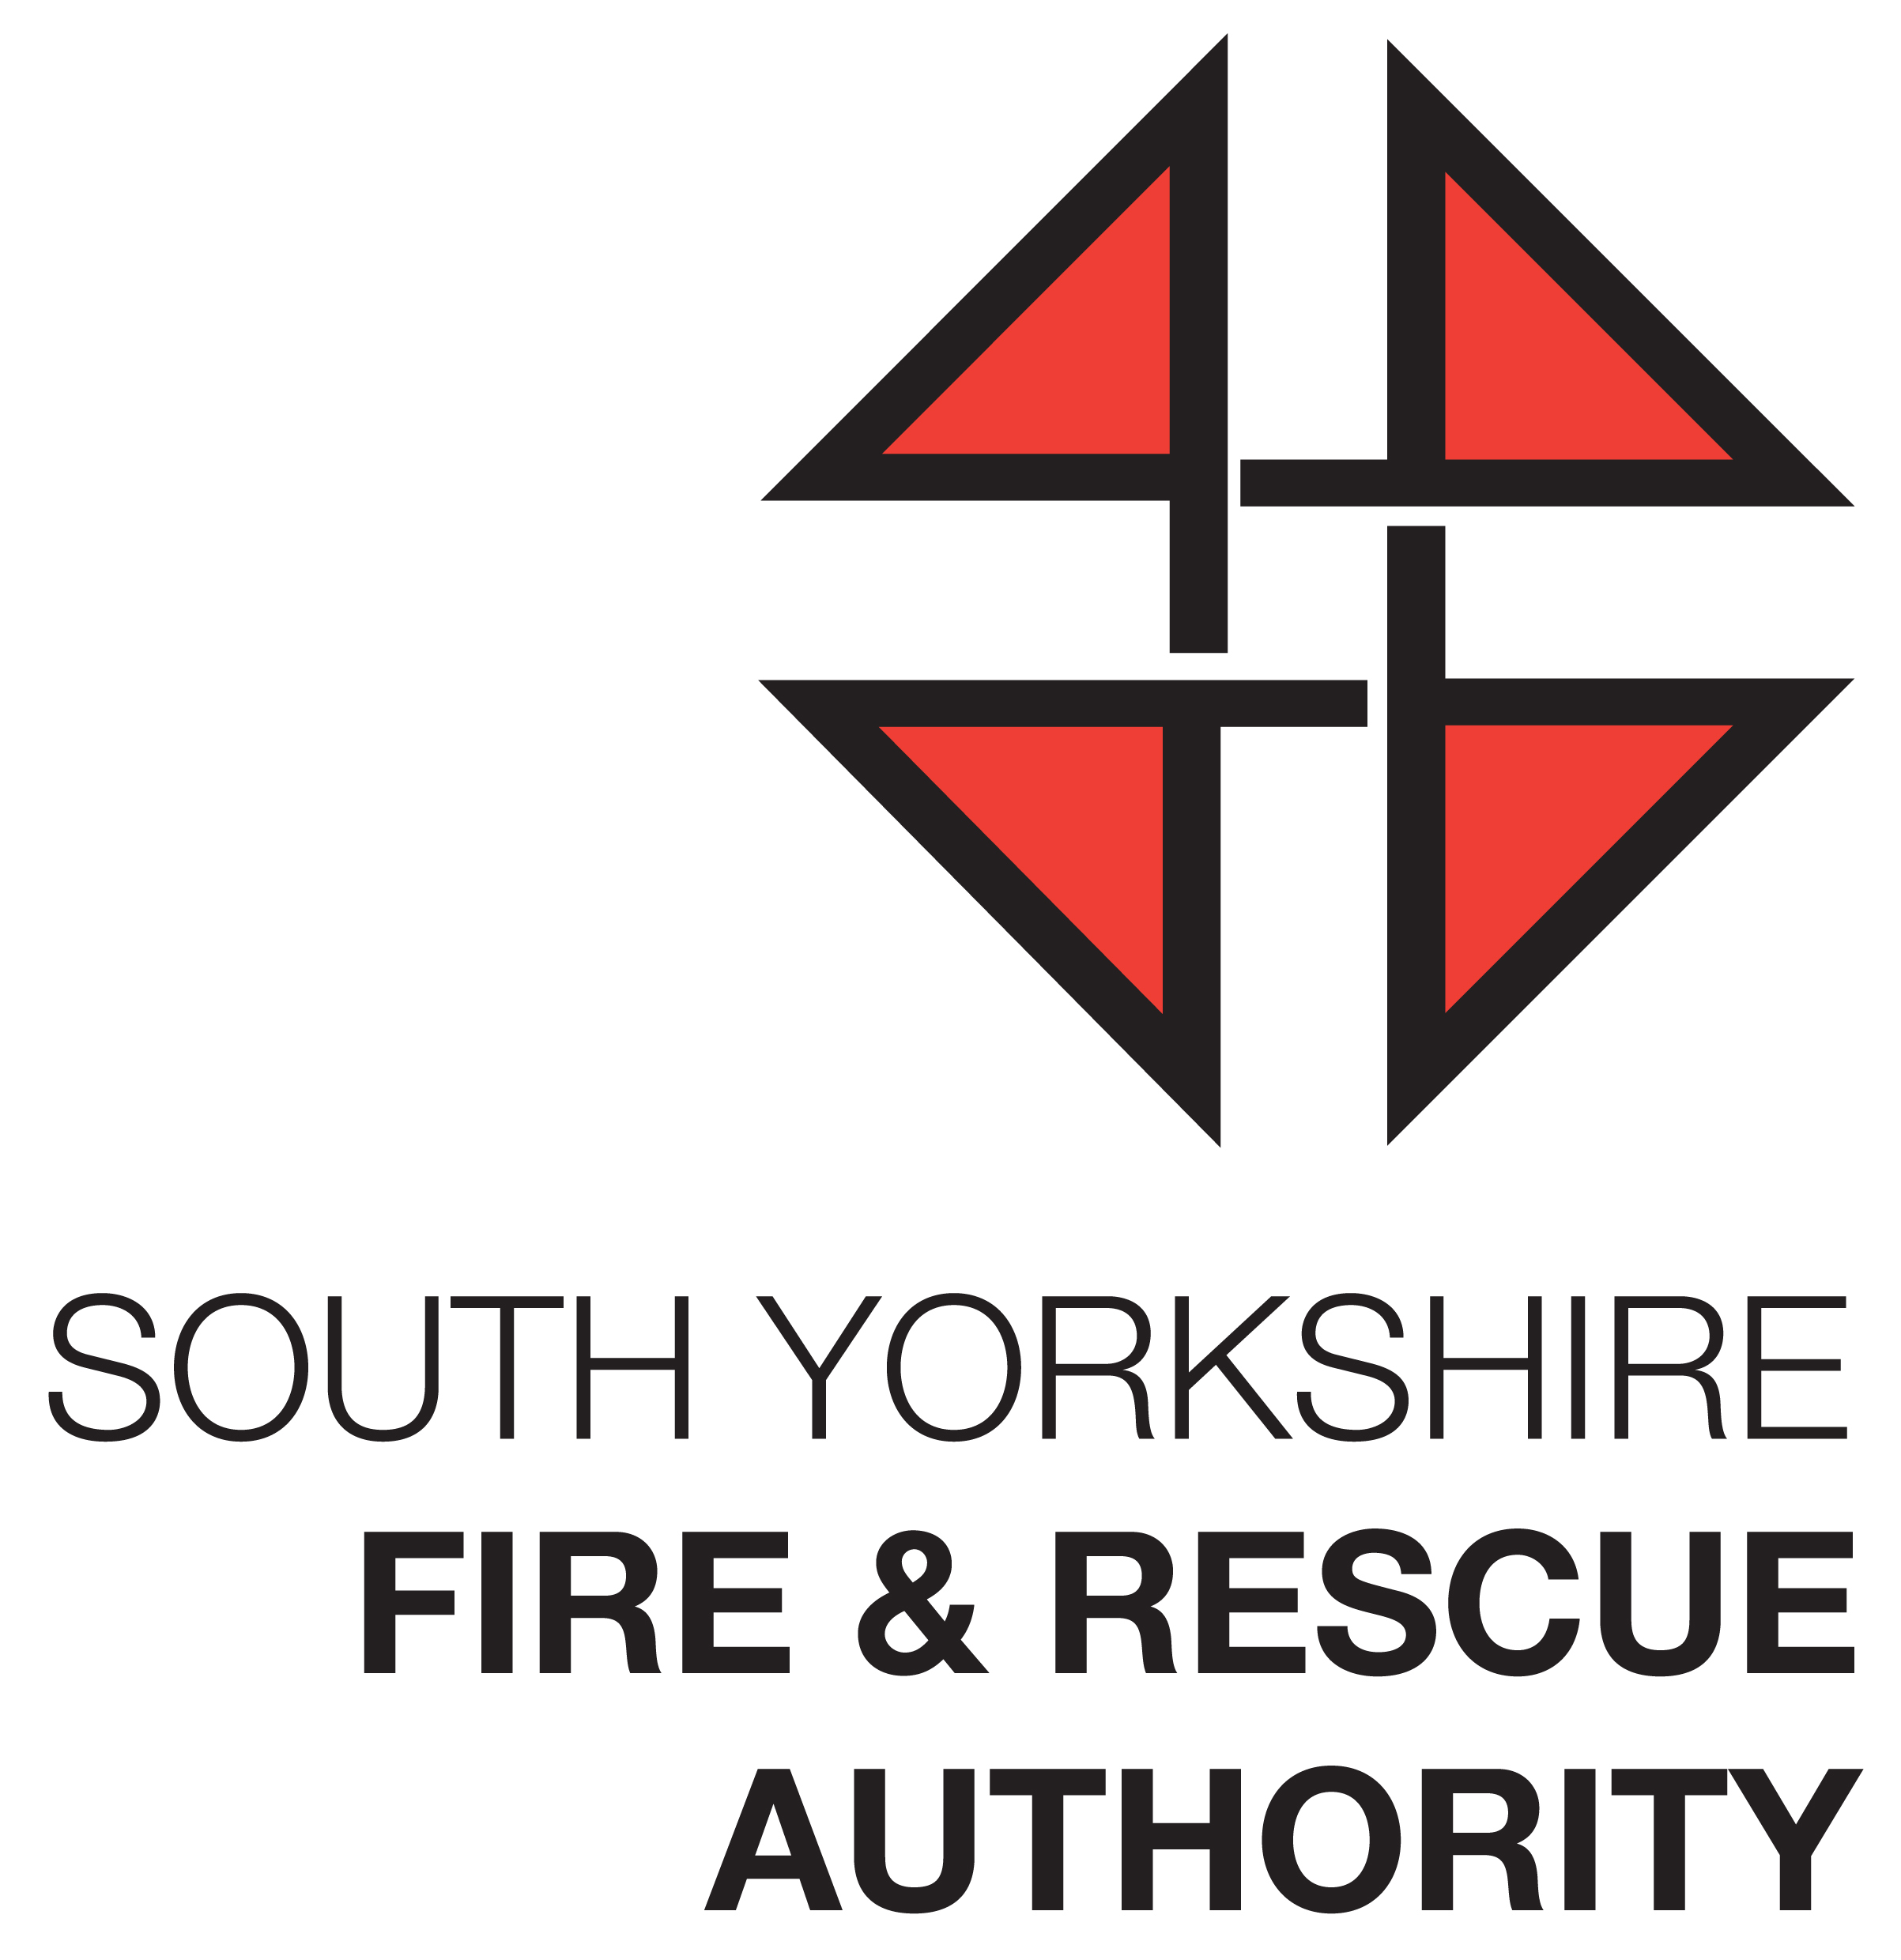 South Yorkshire Fire & Rescue Authority